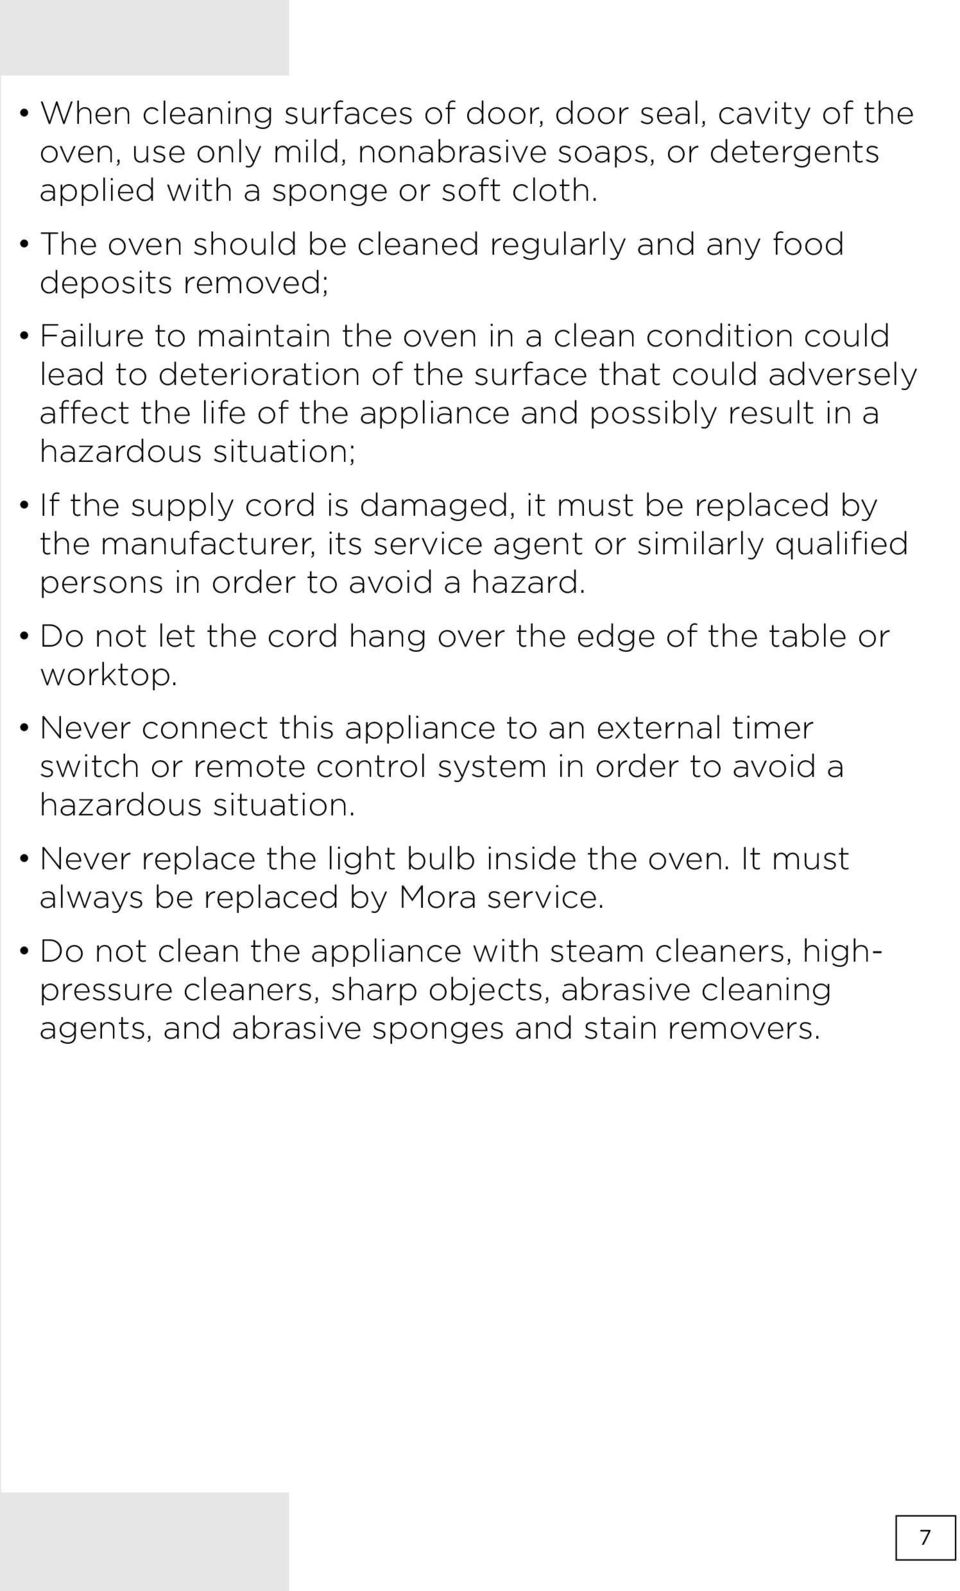 of the appliance and possibly result in a hazardous situation; If the supply cord is damaged, it must be replaced by the manufacturer, its service agent or similarly qualified persons in order to